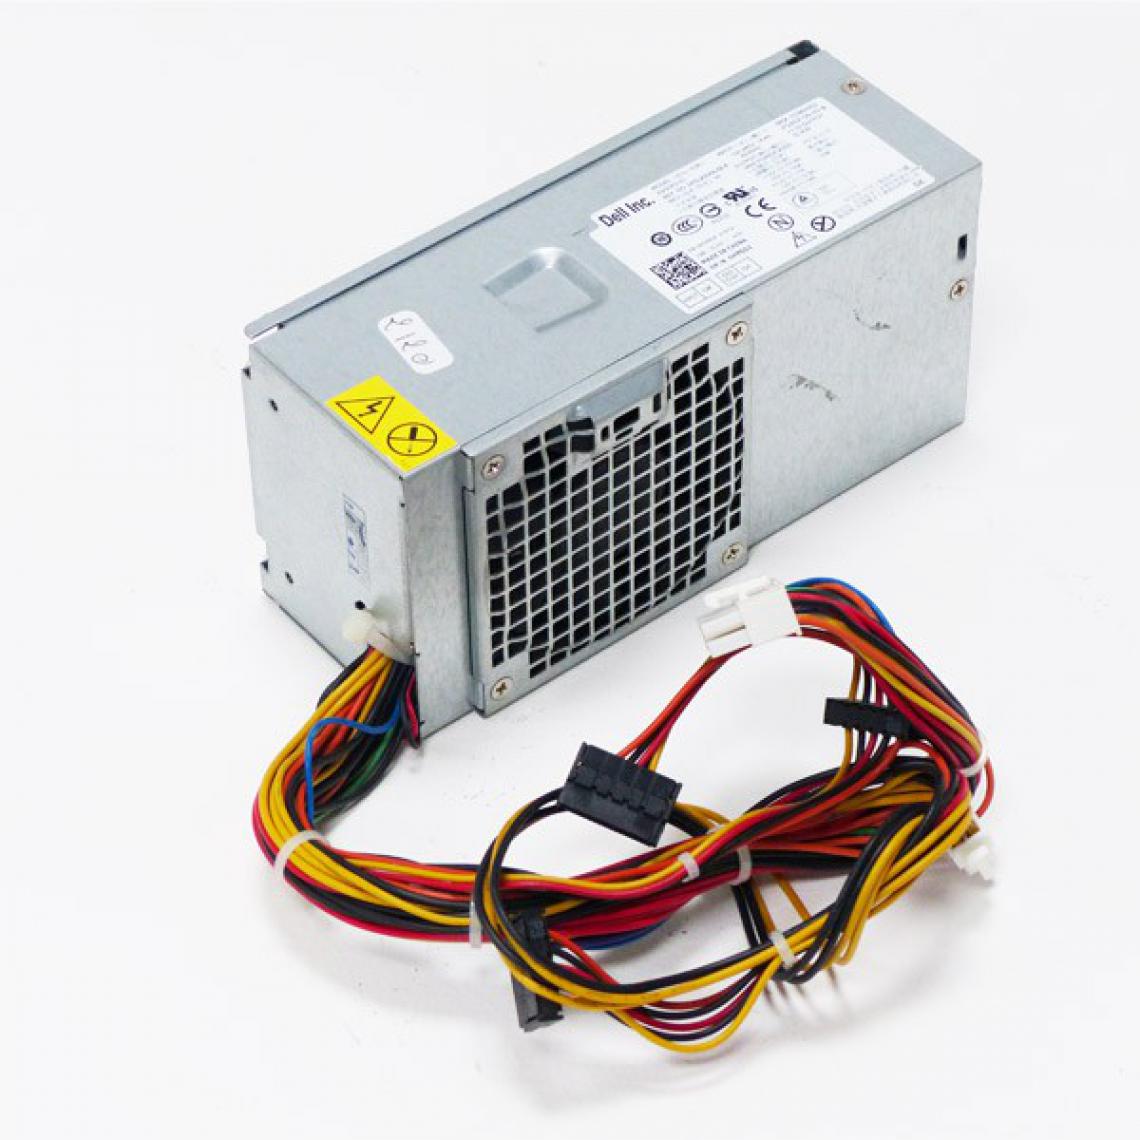 Dell - Alimentation DELL D250AD-00 250W Optiplex 390 DT Power Supply - Alimentation modulaire